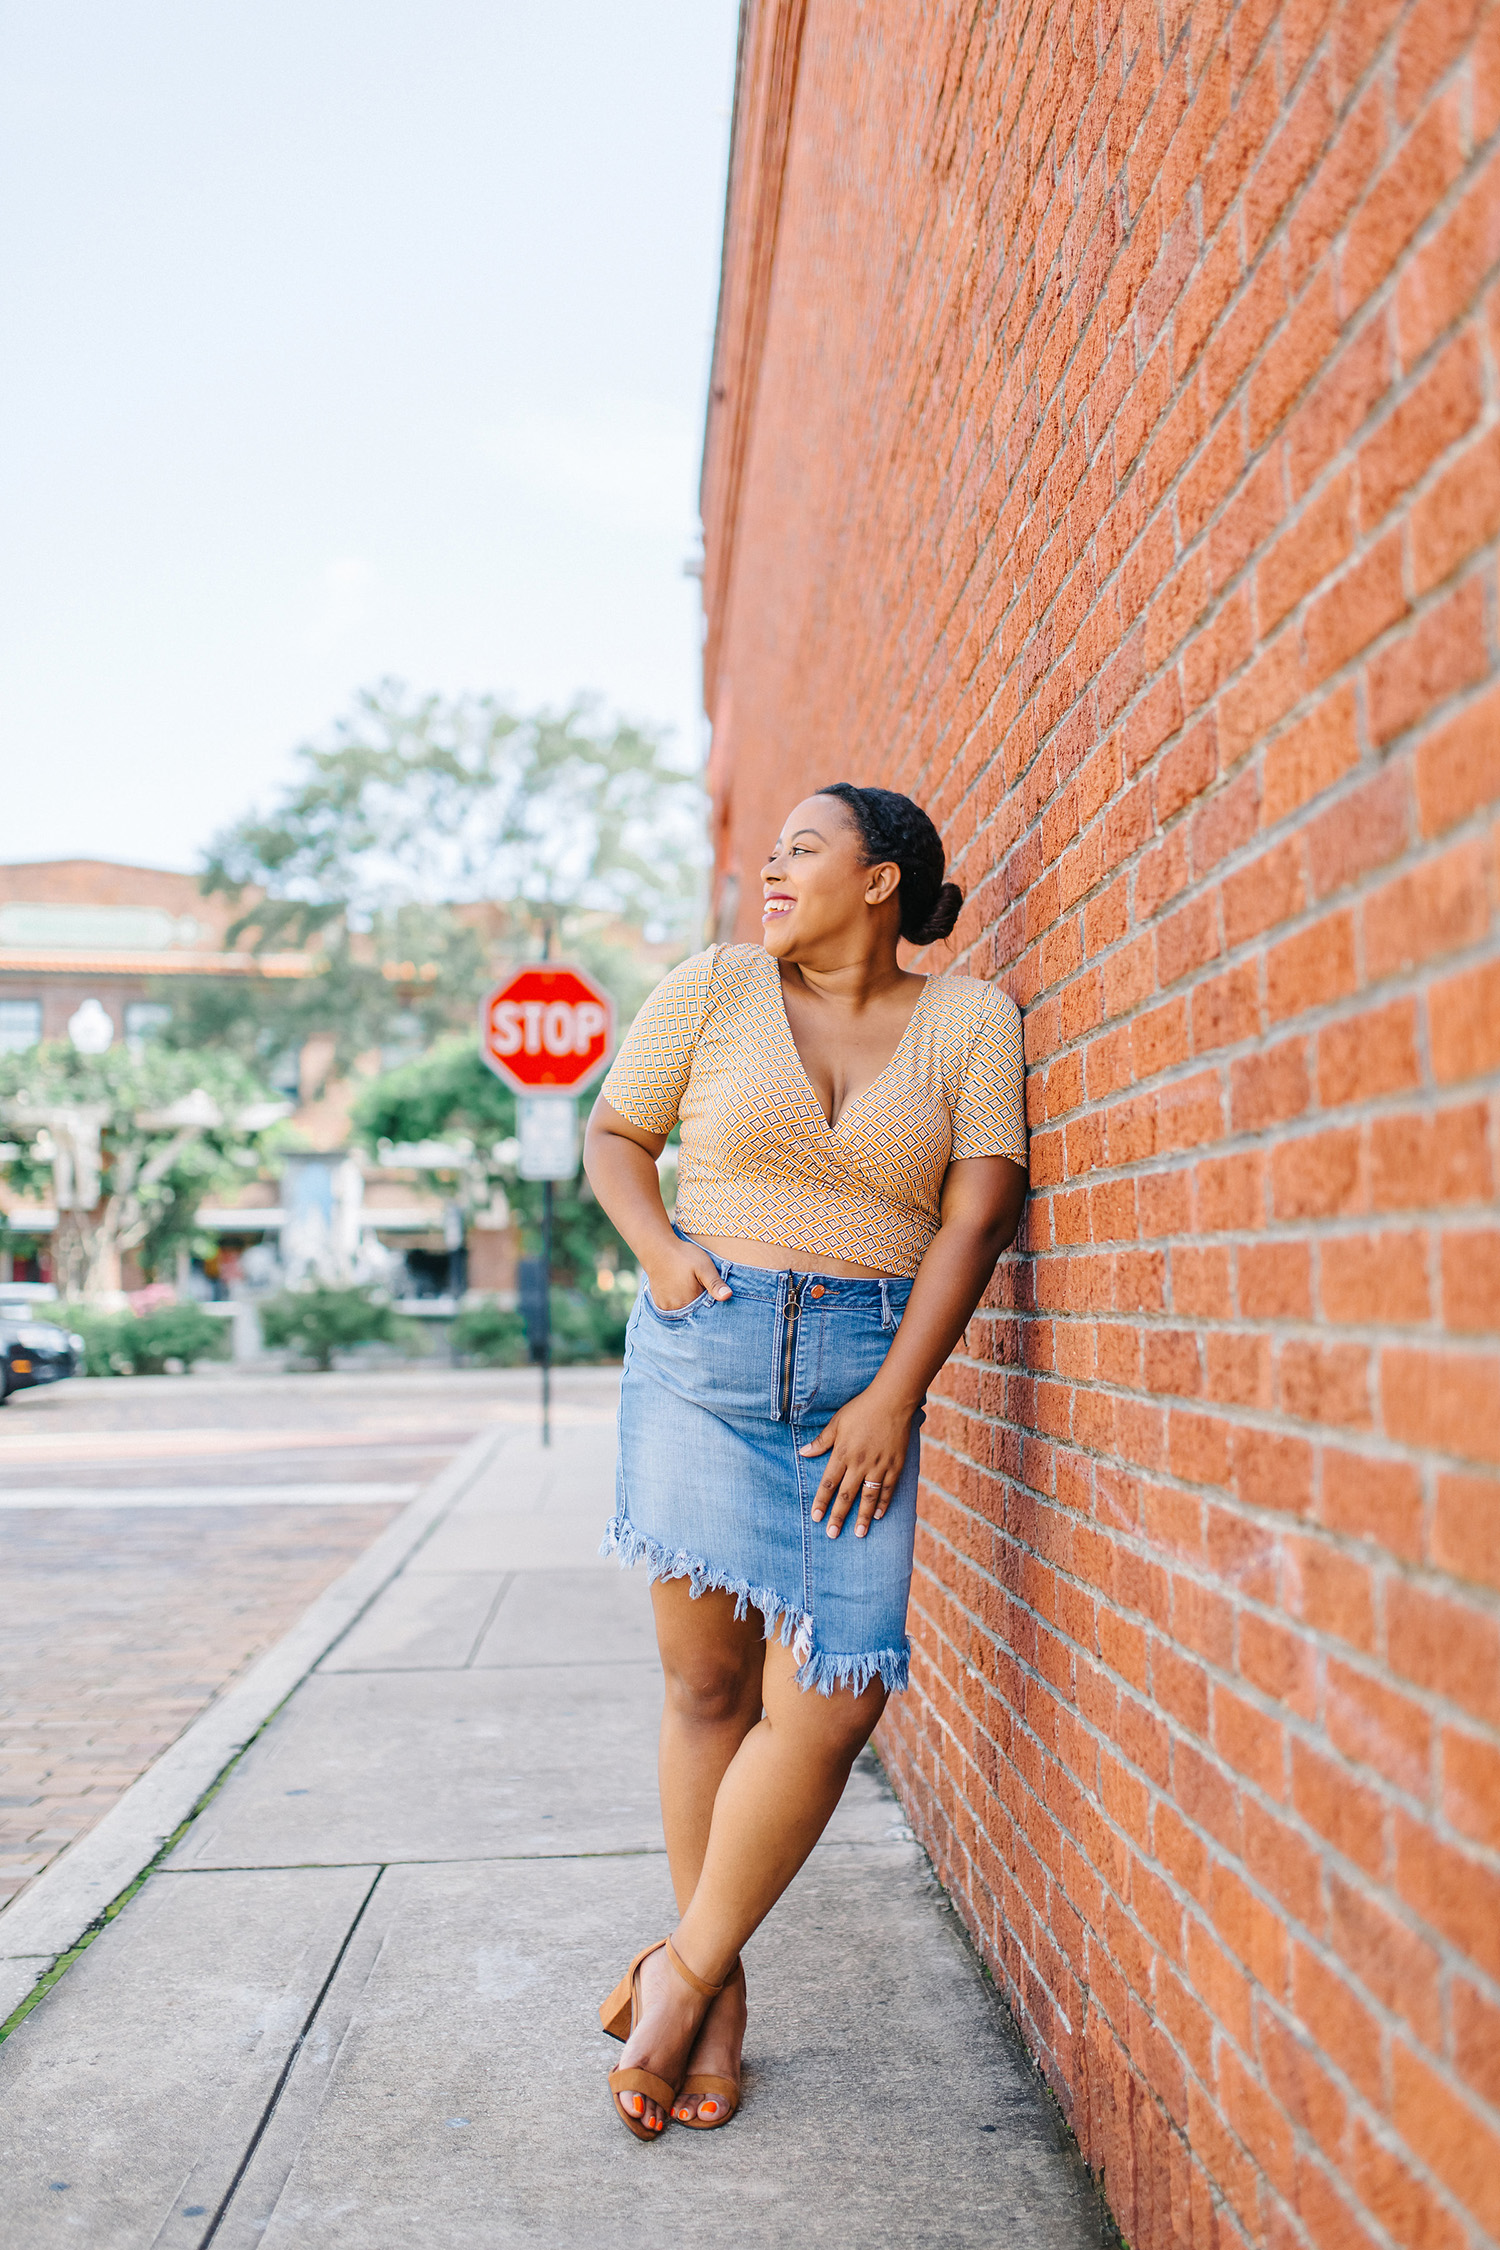 orlando lifestyle blogger shares tips for finding your mom style